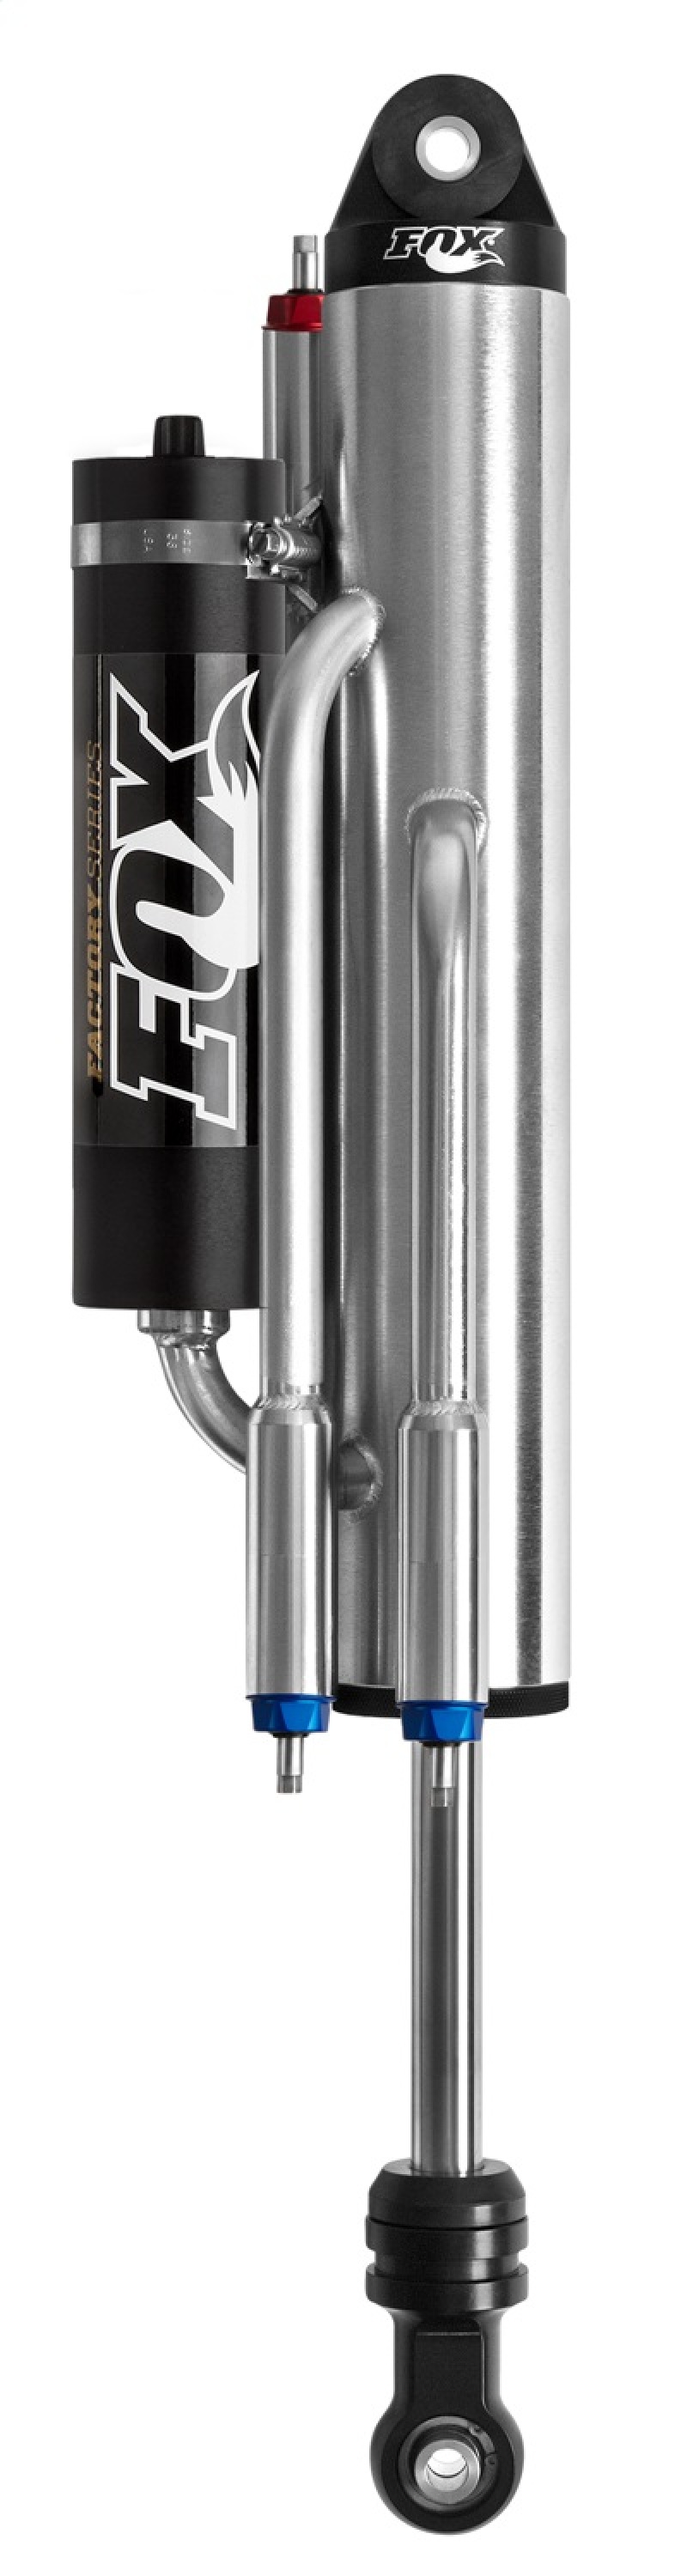 Fox 3.0 Factory Series 14in. Piggyback Res. 4-Tube Bypass Shock 1in. Shaft Short Course - Black/Zinc - 981-02-426